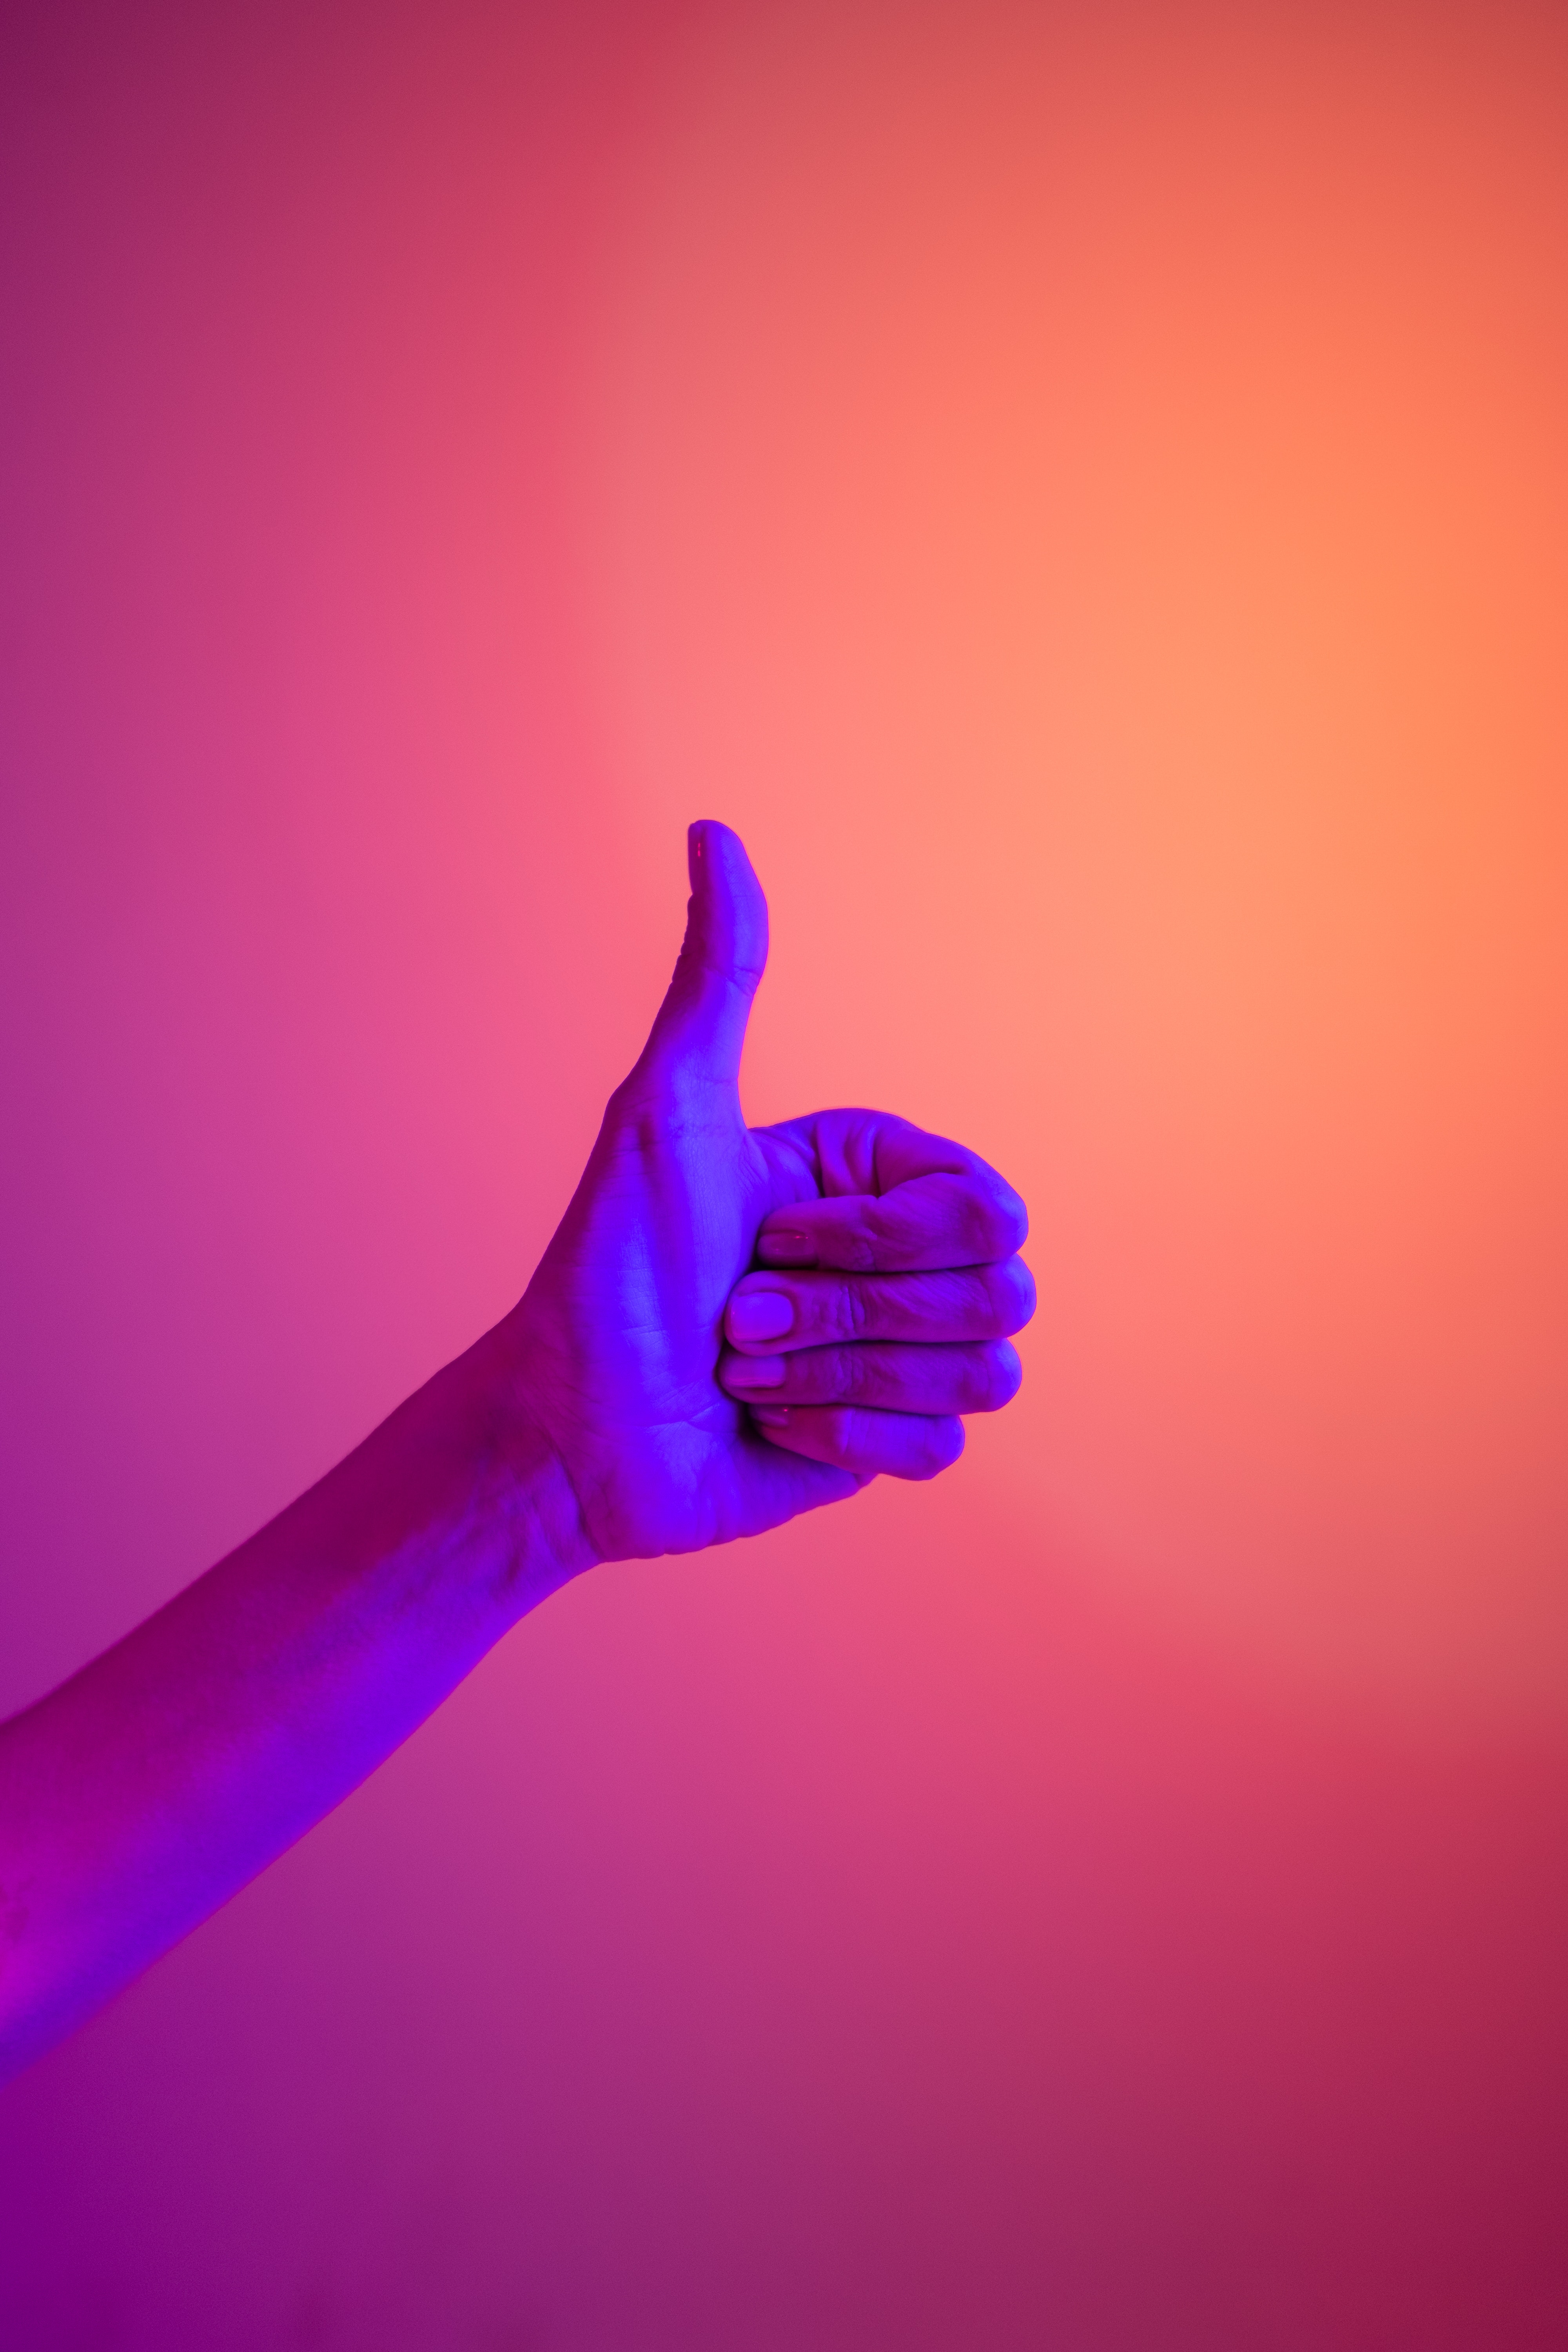 Thumbs up with a gradient background